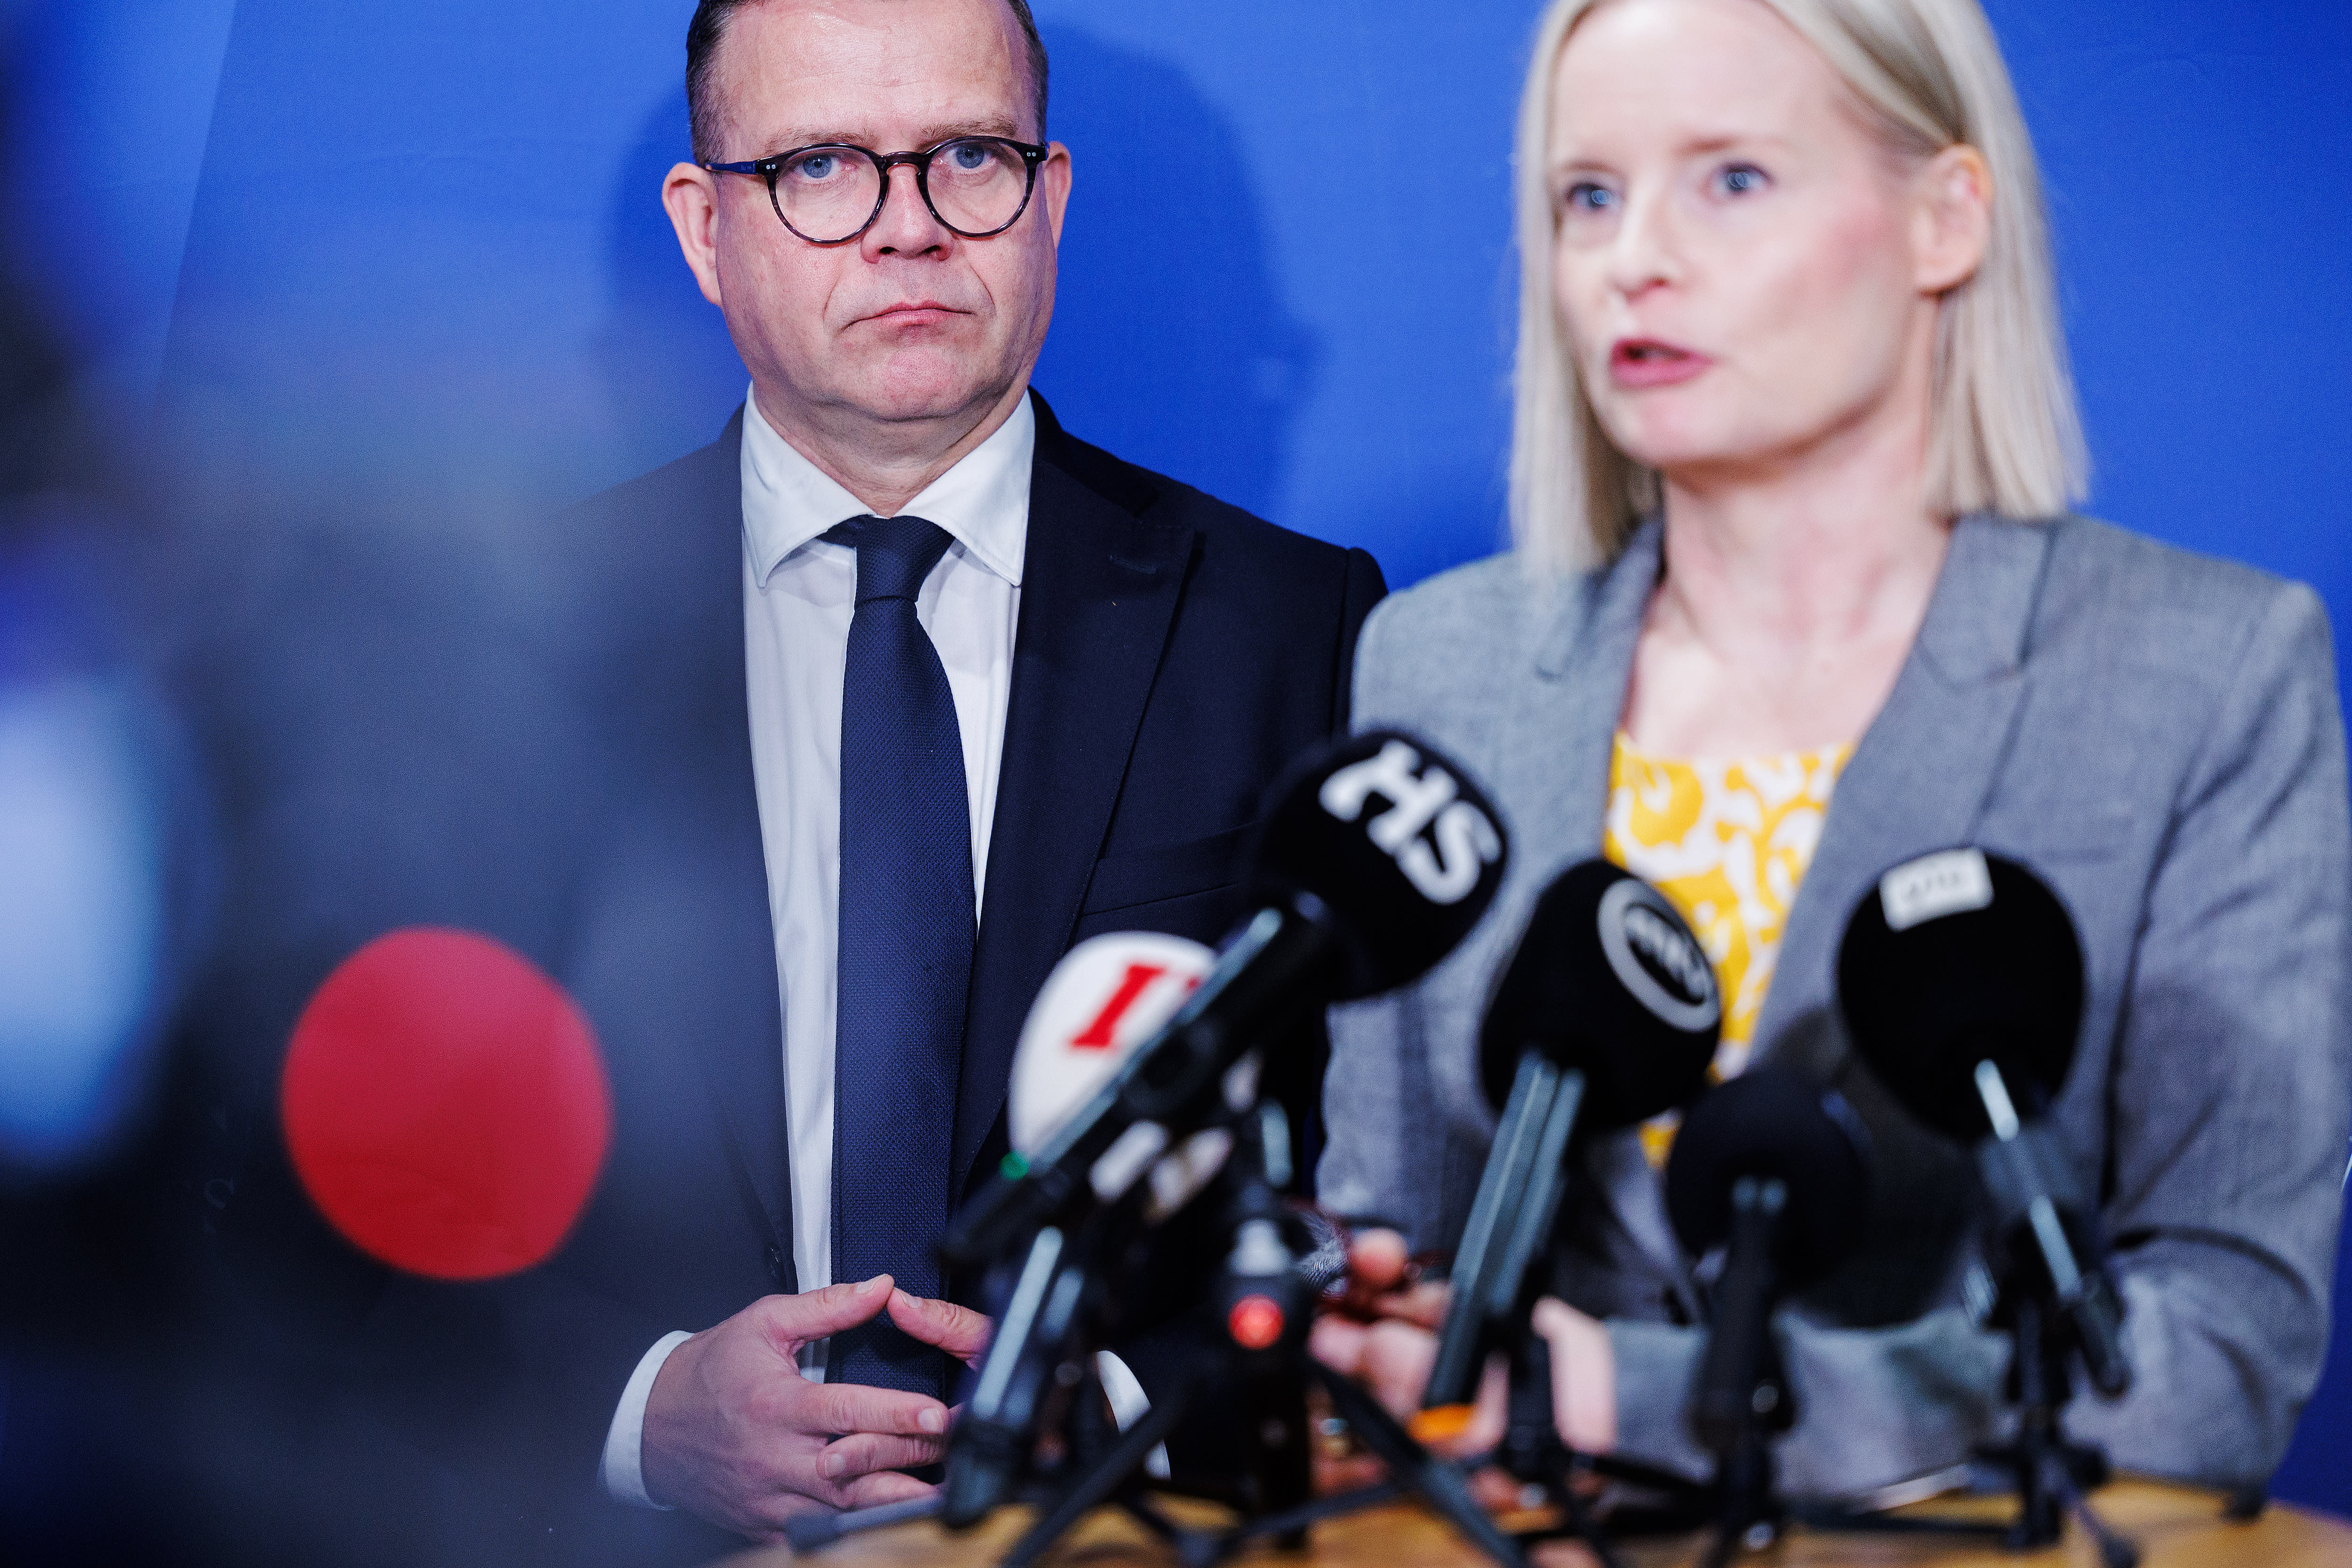 "Walks, demonstrations and demonstrations": Finland’s largest trade union will start a campaign against government cuts next week